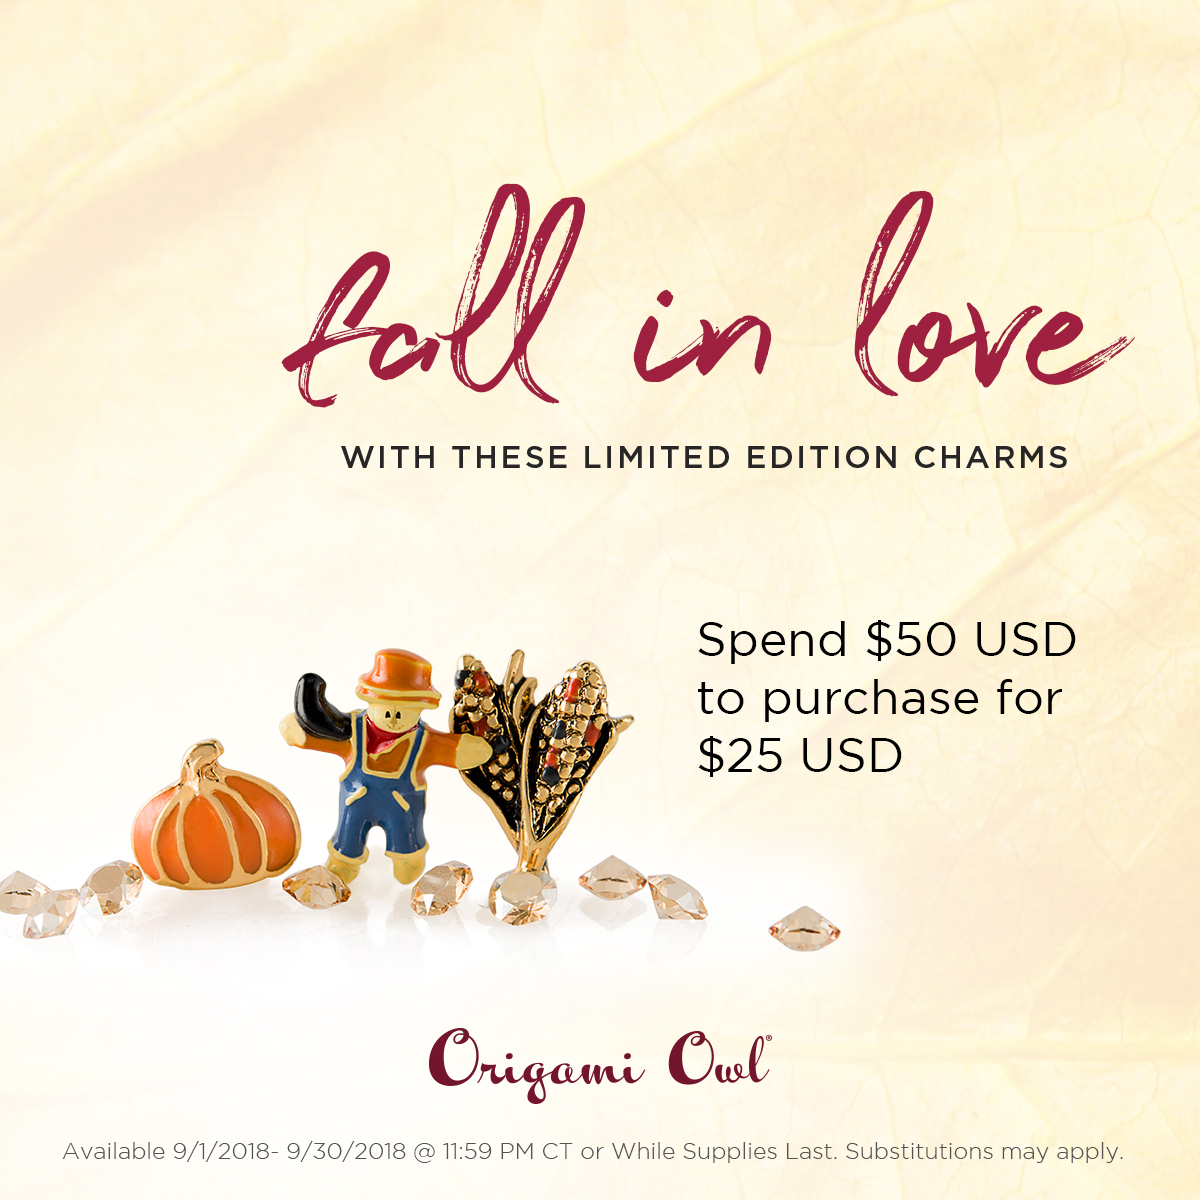 Origami Owl Christmas Charms September 2018 Origami Owl Exclusives And Specials Locket